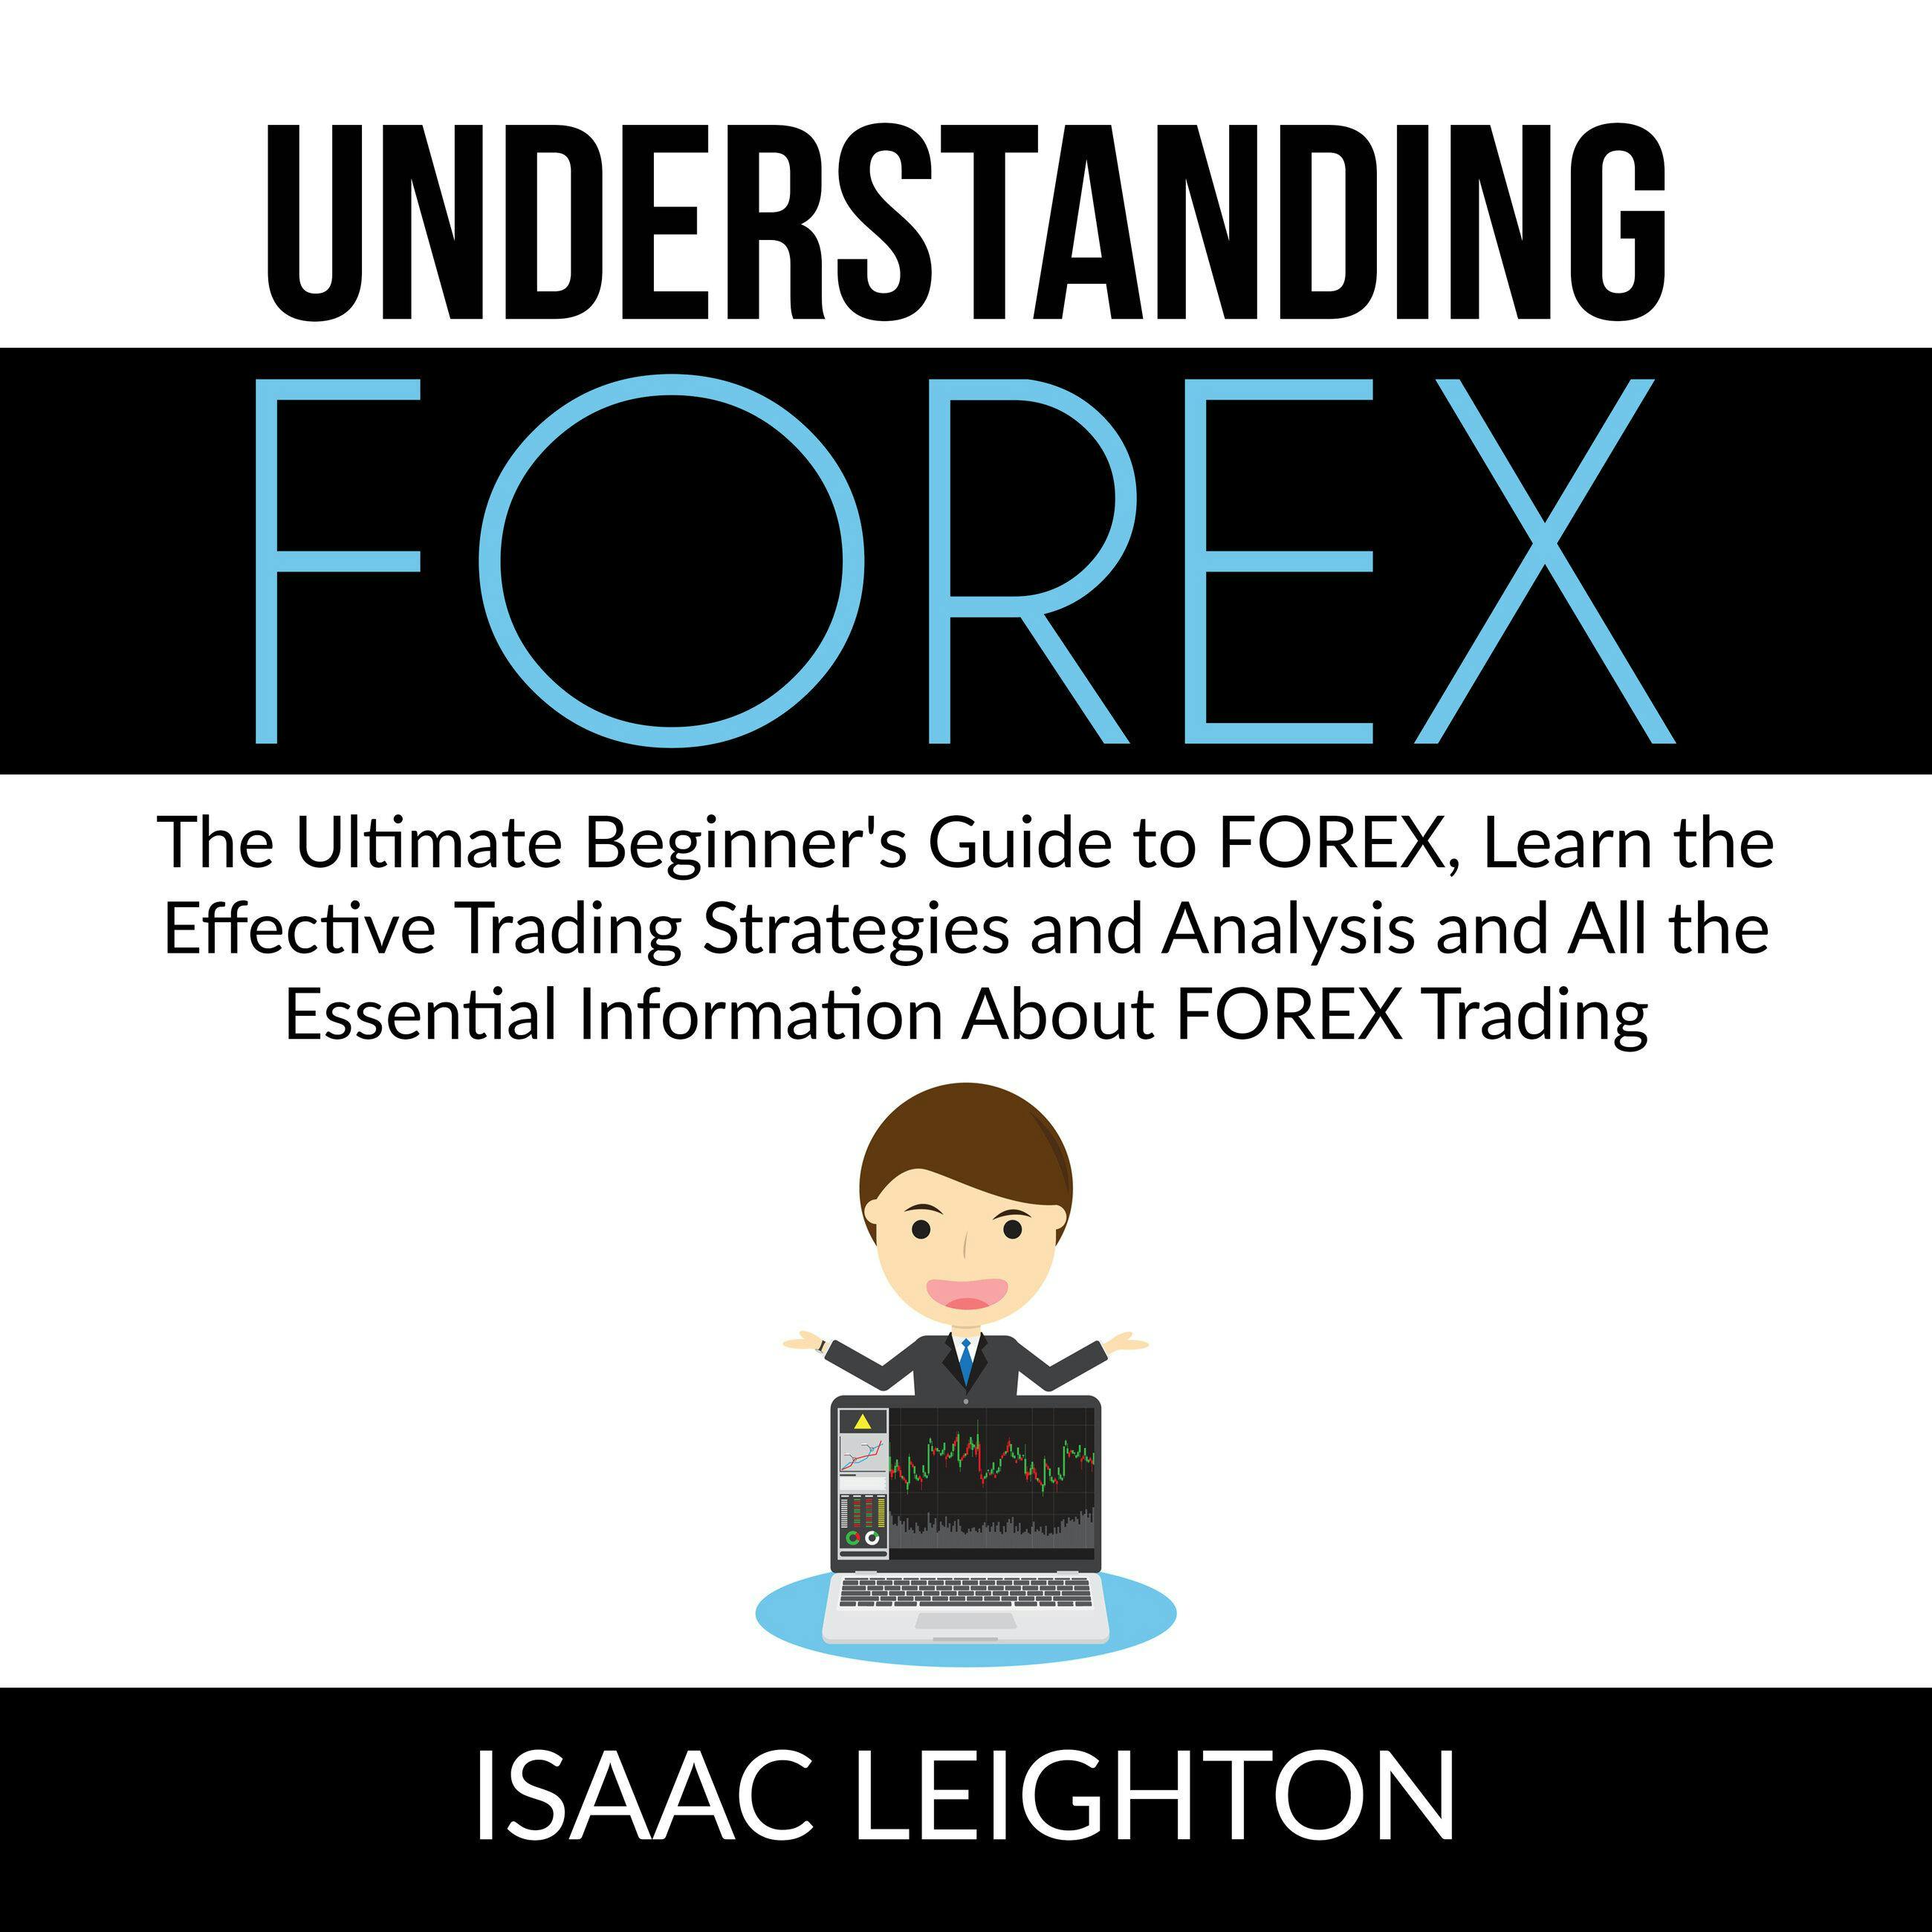 Understanding FOREX: The Ultimate Beginner's Guide to FOREX, Learn the Effective Trading Strategies and Analysis and All the Essential Information About FOREX Trading - Isaac Leighton